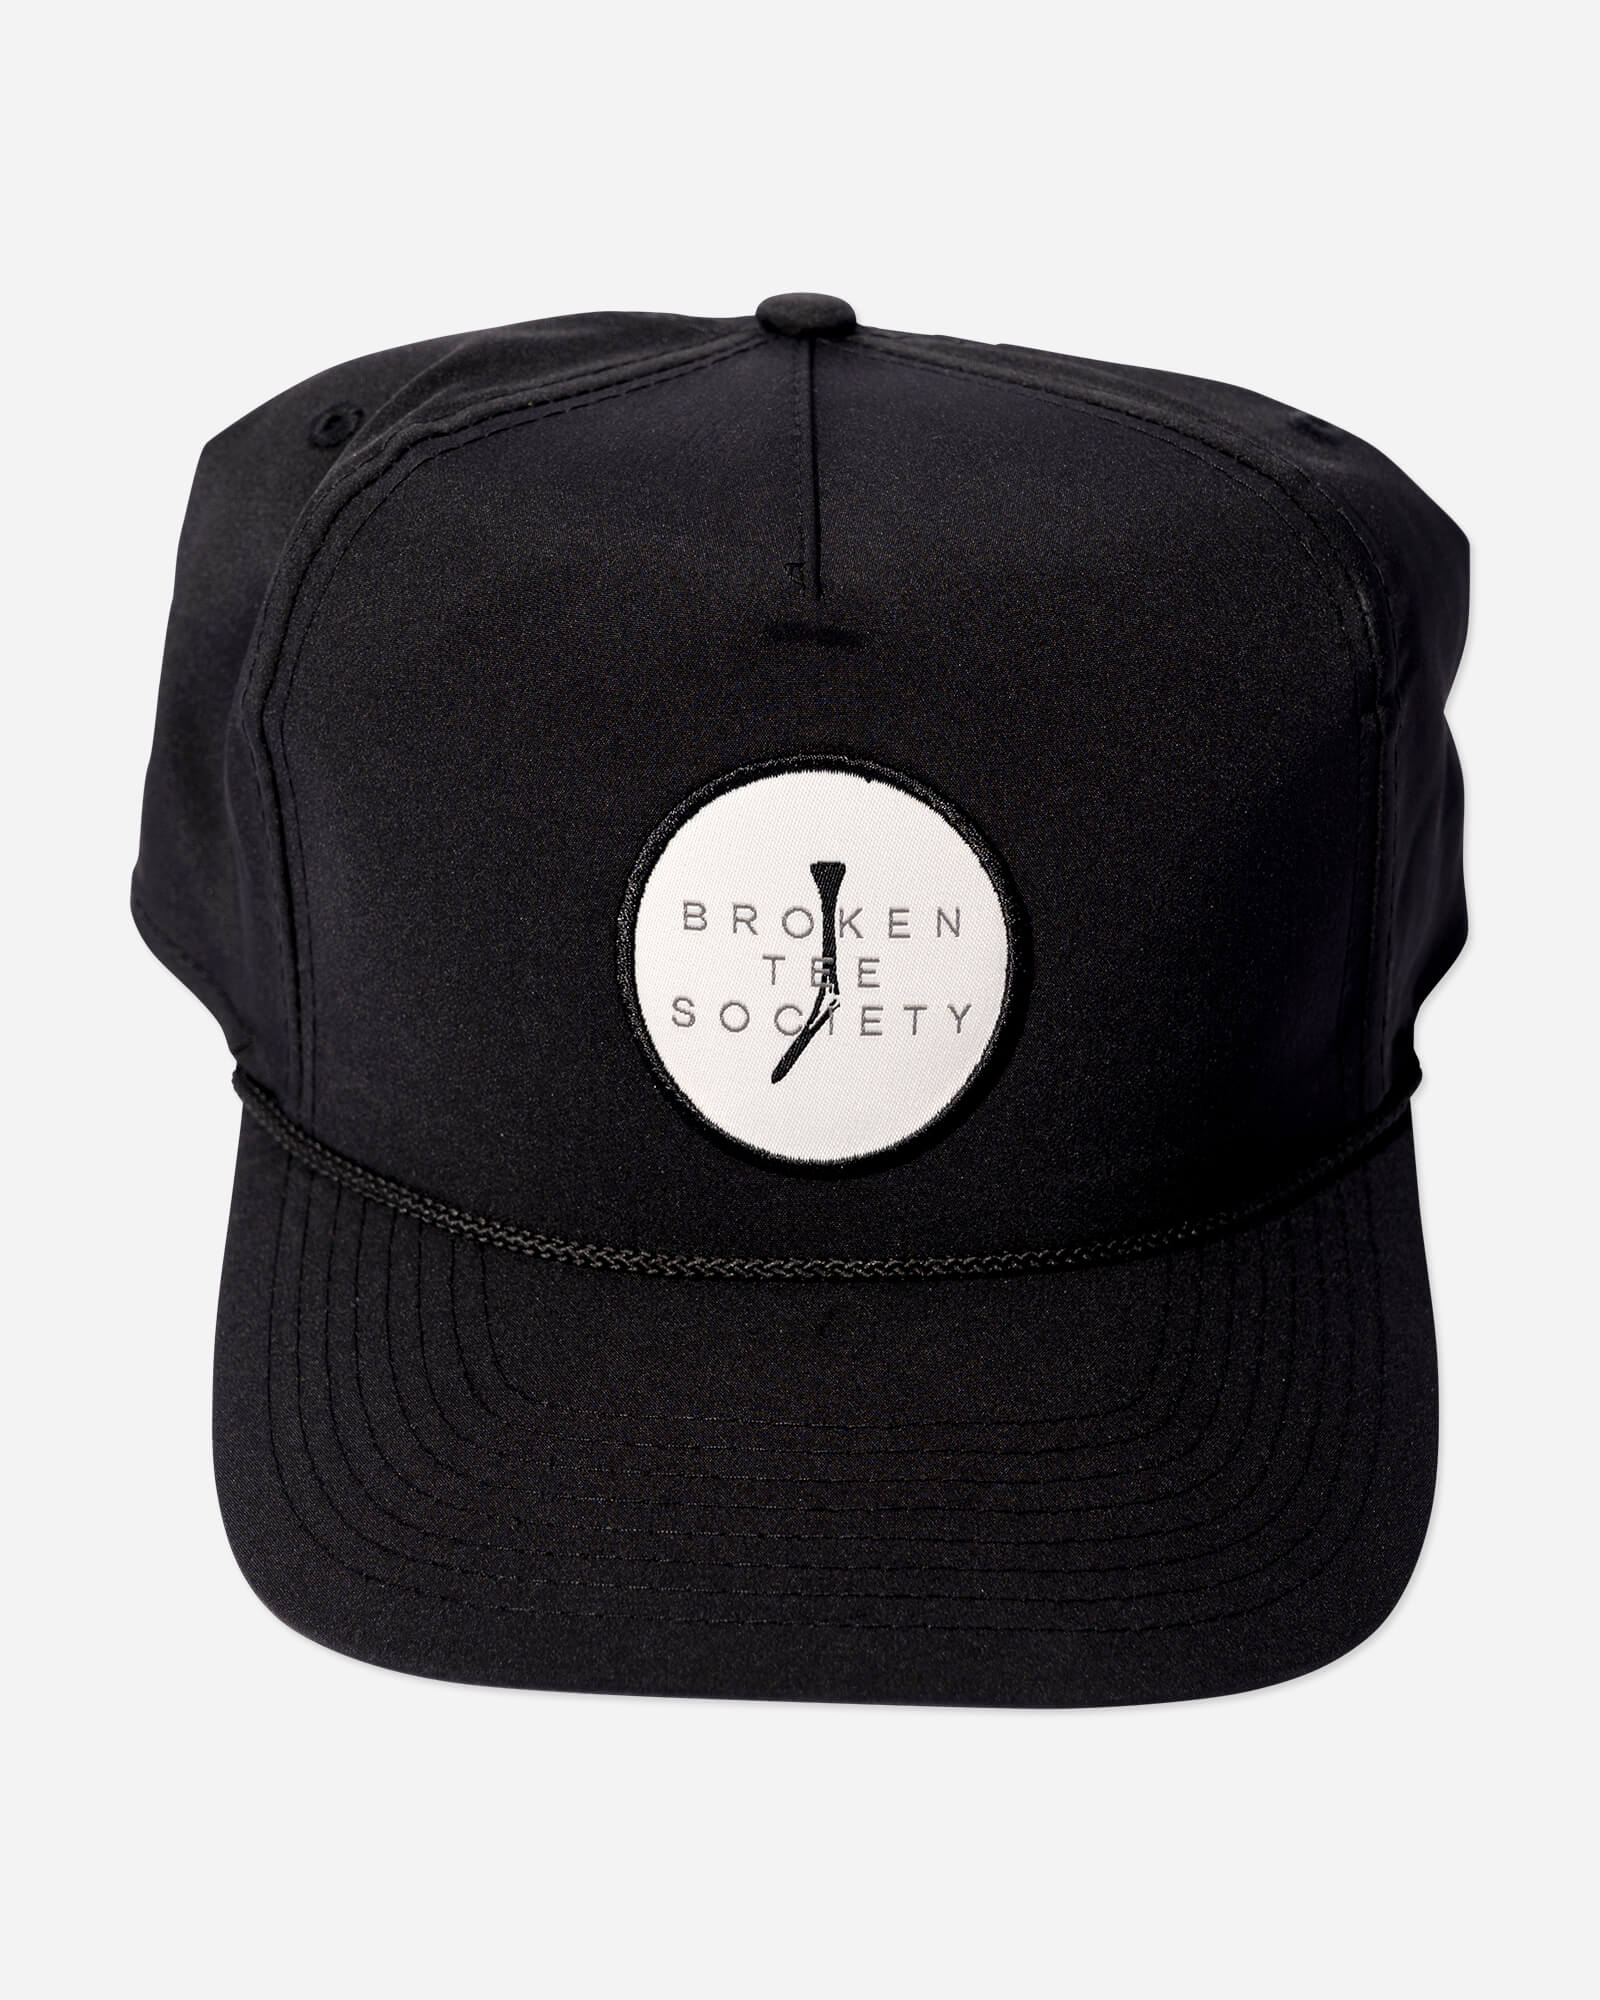 THE GOLFERS JOURNAL The Member Hat in Black